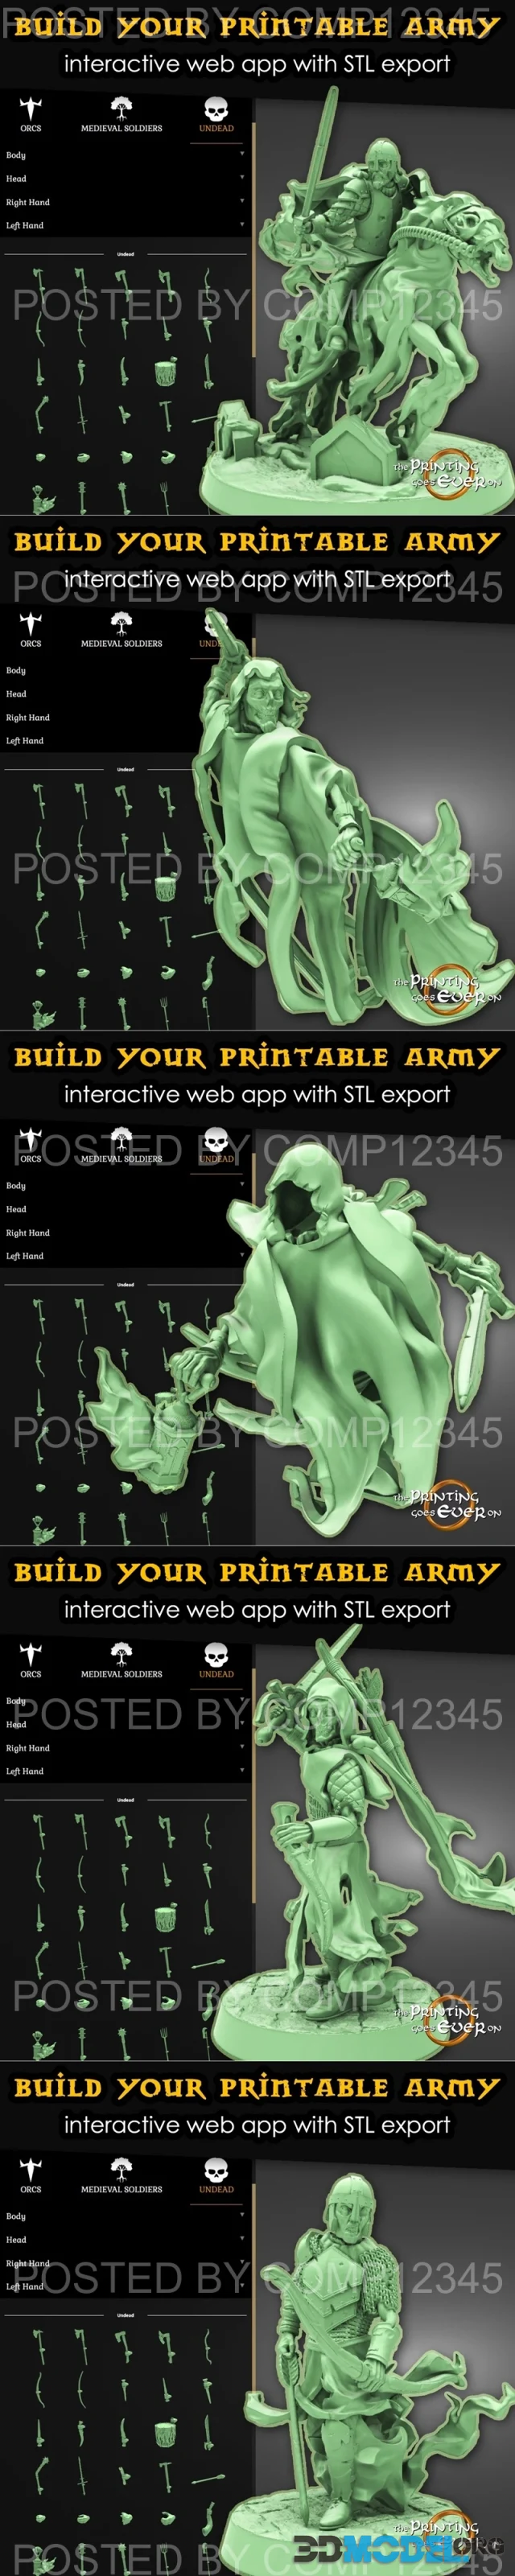 TPGEO Chapter 34 - Undead Army – Printable